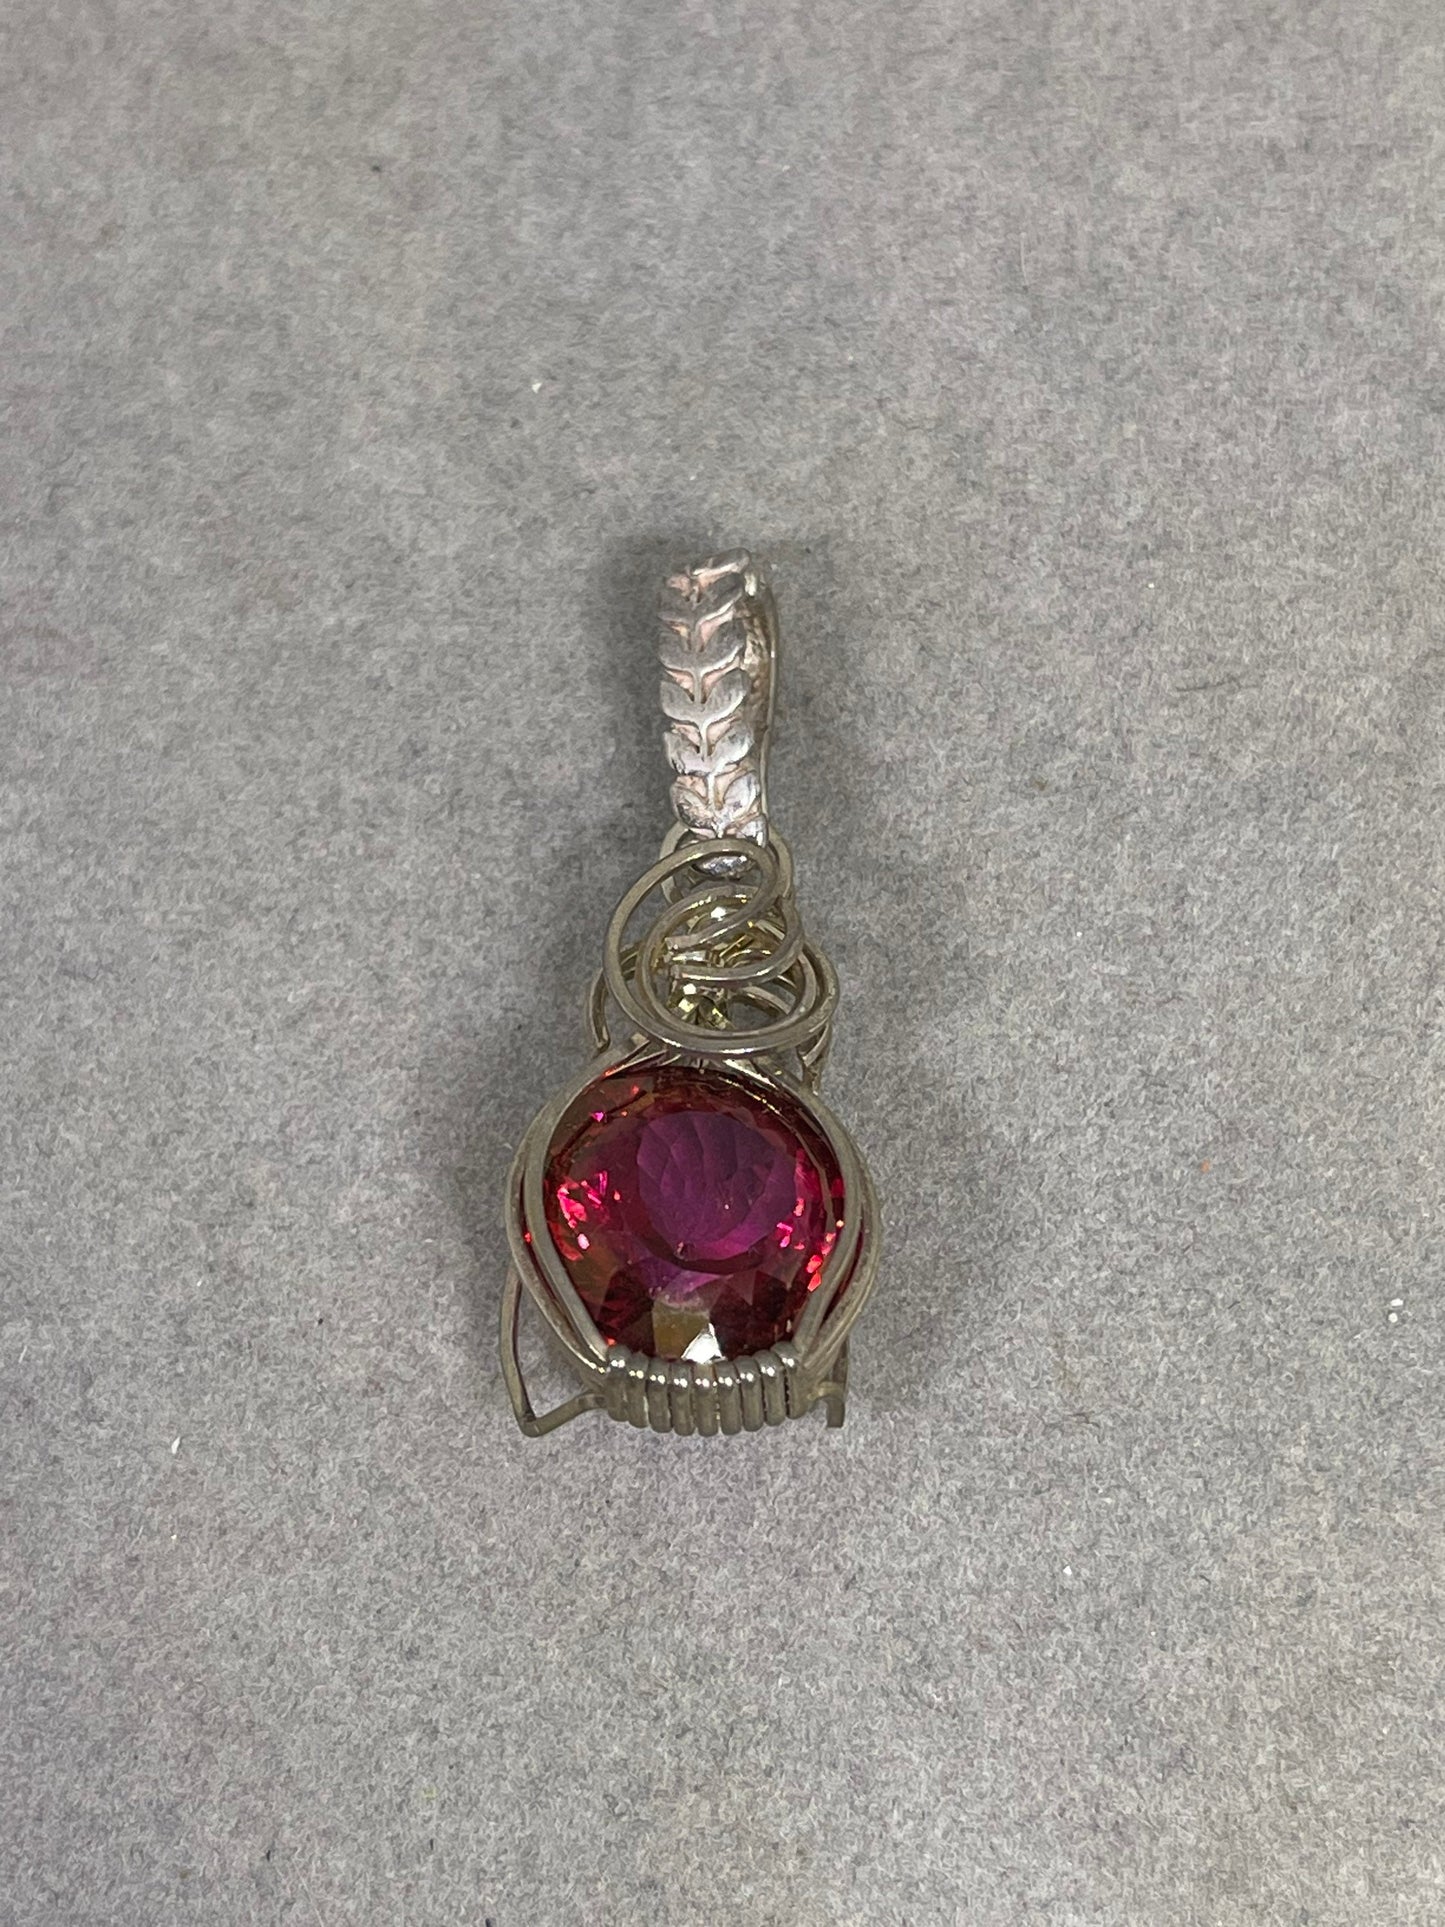 Fire Mystic Topaz Sterling Silver Wire Wrapped Enhancer Pendant